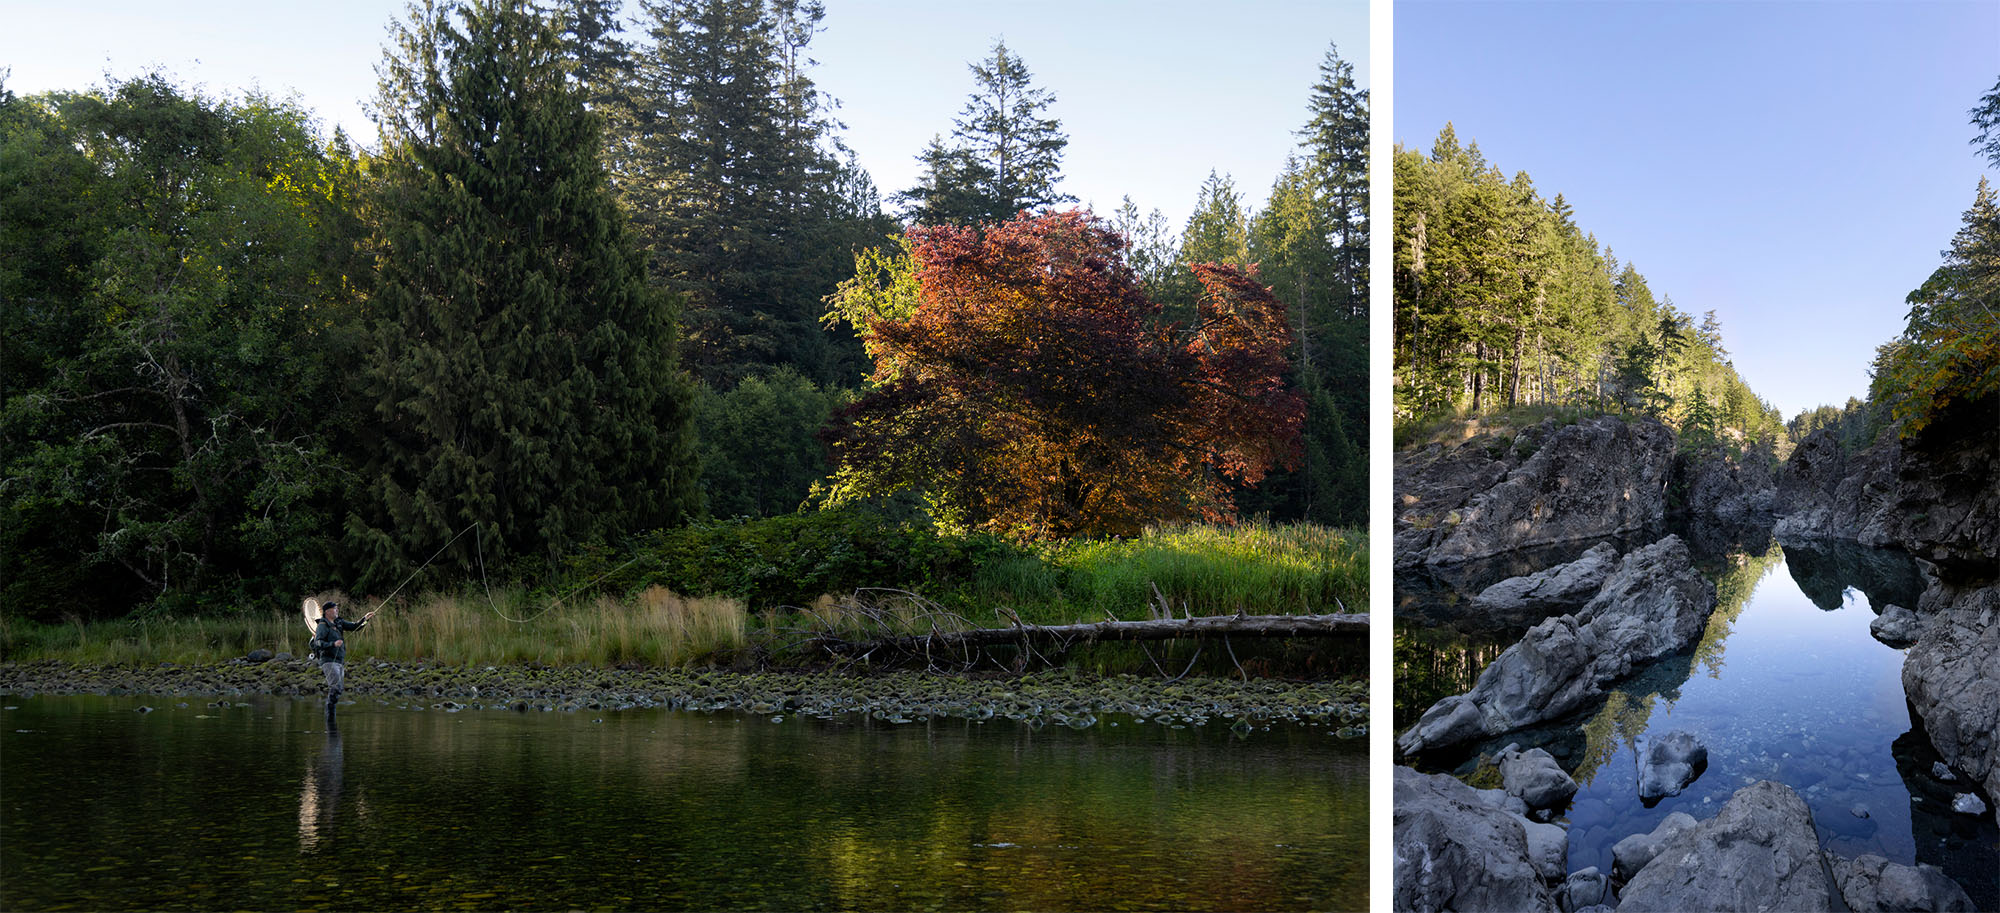 Explore the great outdoors in Sooke, professional lifestyle photography.